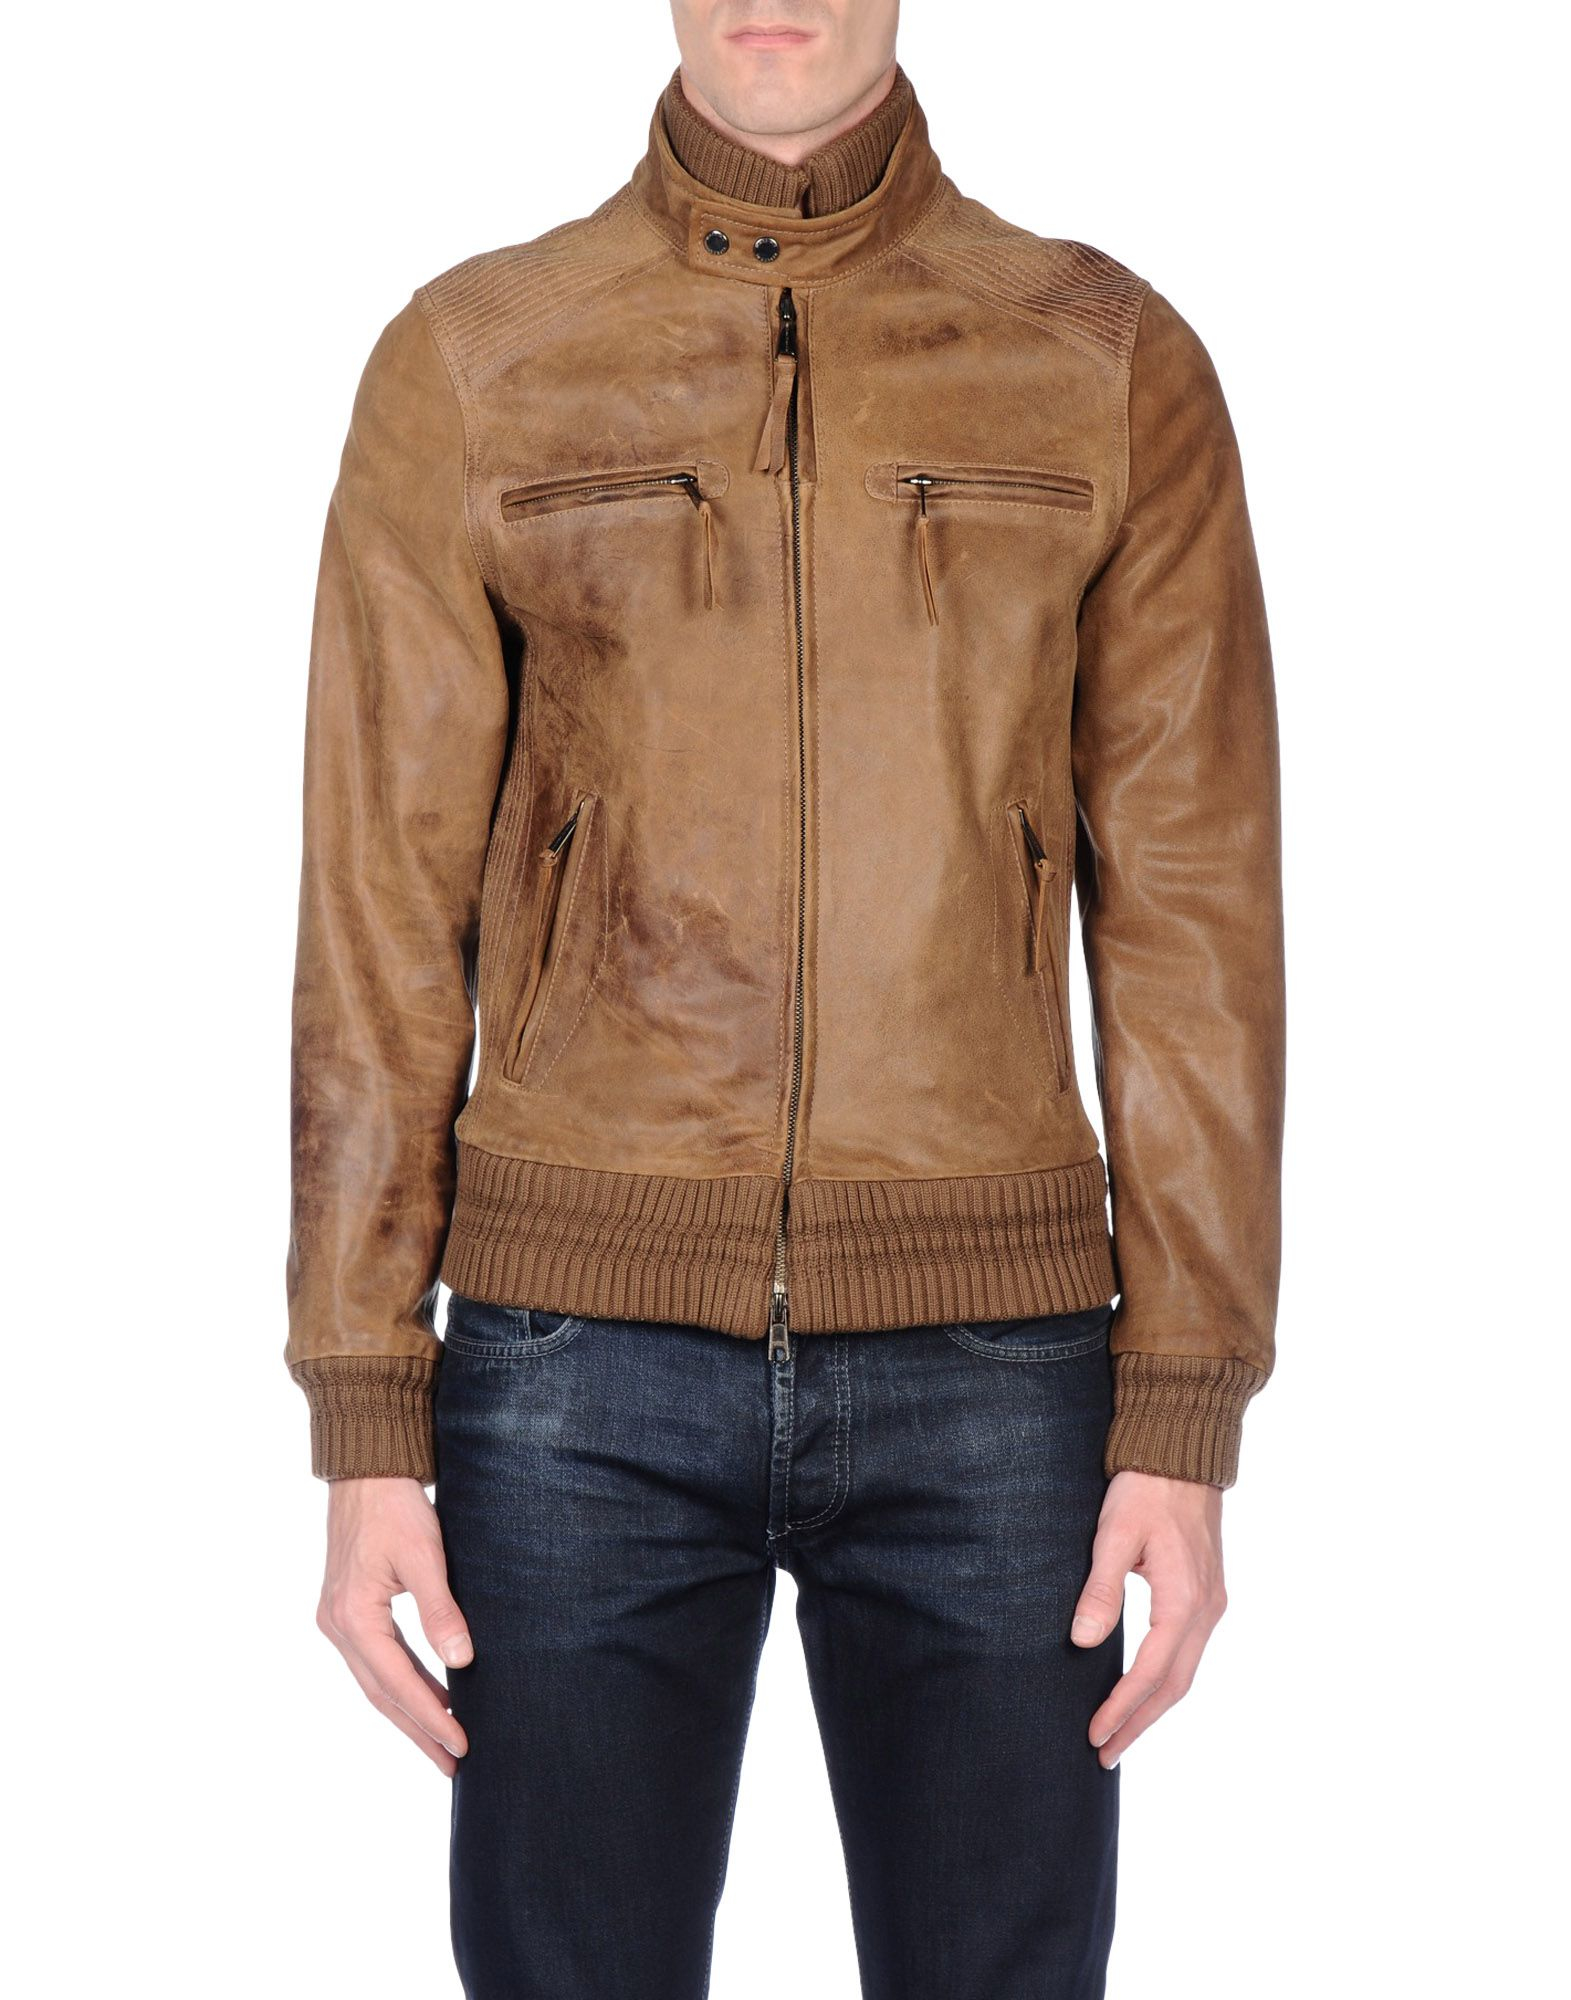 Massimo Rebecchi Jacket in Brown for Men - Lyst